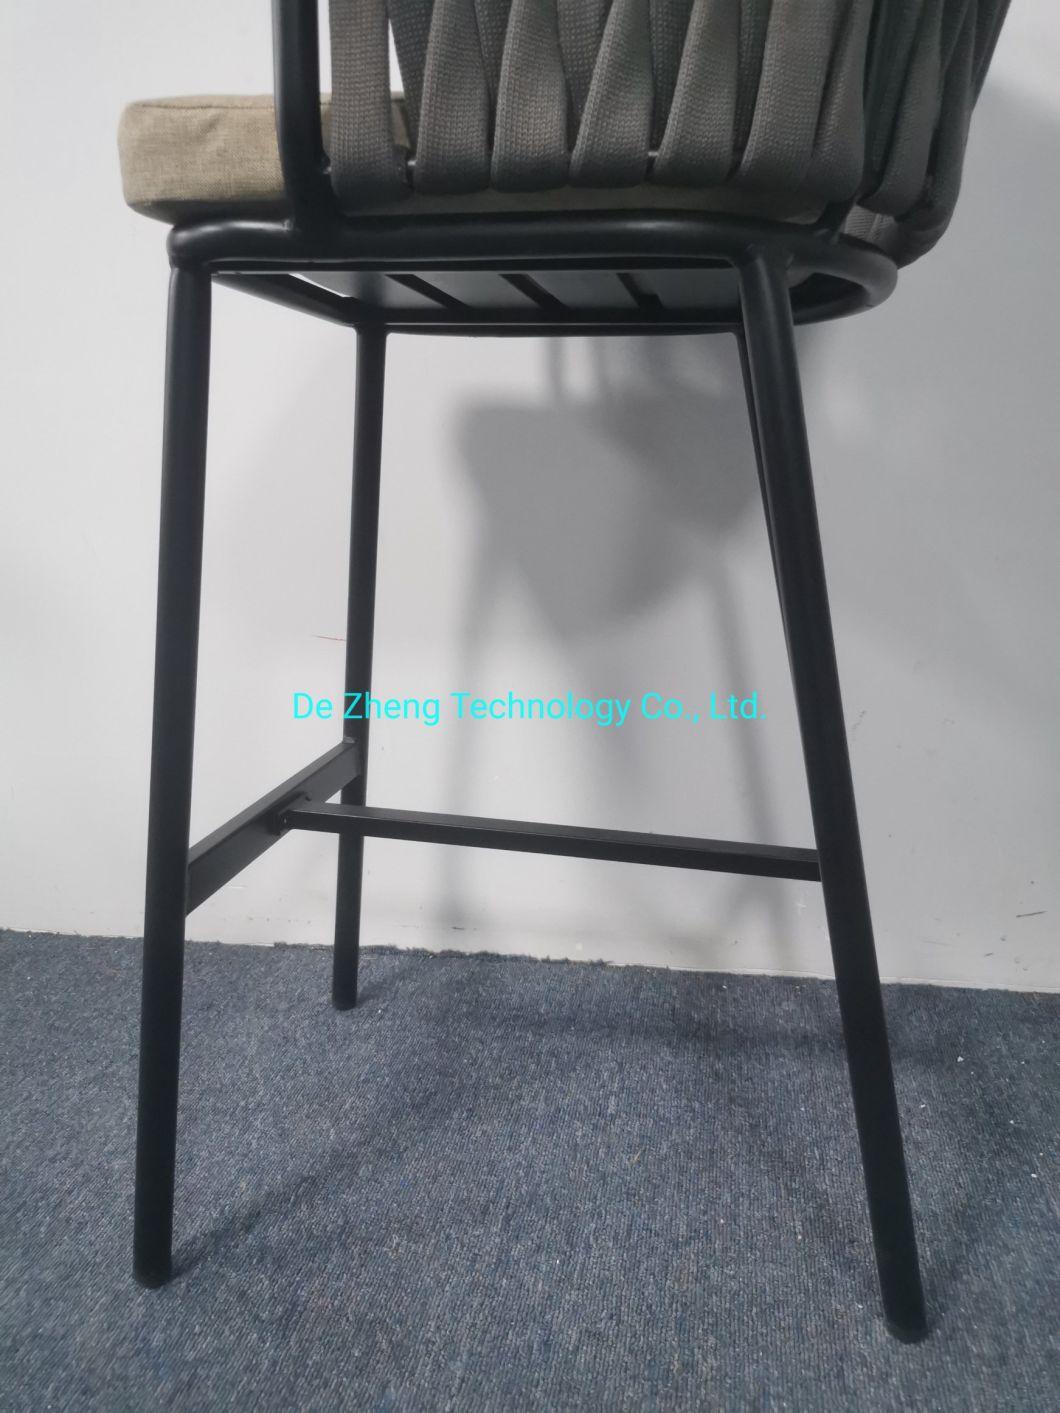 Modern Design Best Quality Outdoor Bar Furniture High Quality Rope Bar Stool Best Price Outdoor Bar Stool Chair